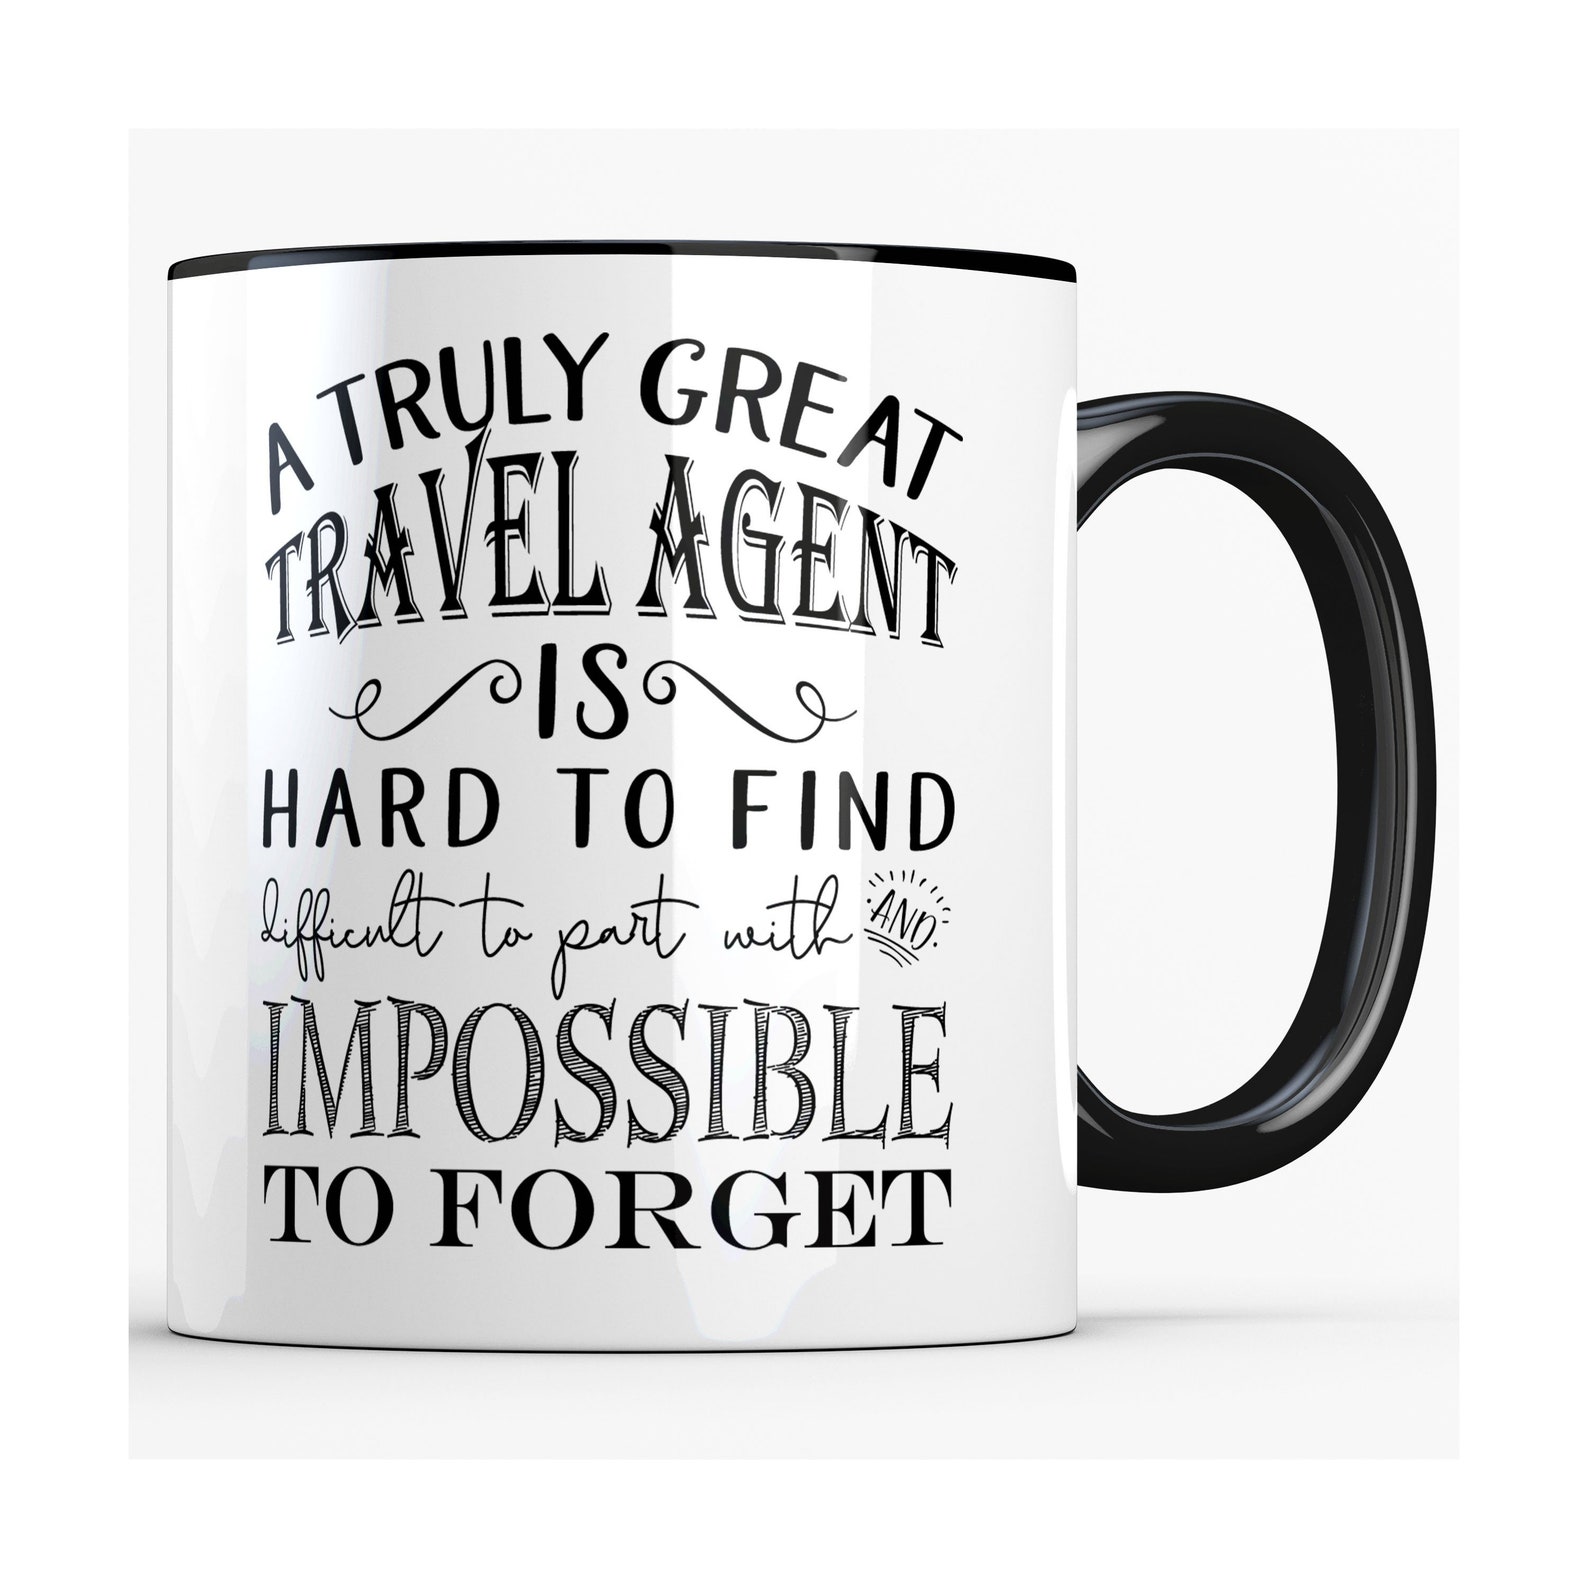 ncl travel agent gifts